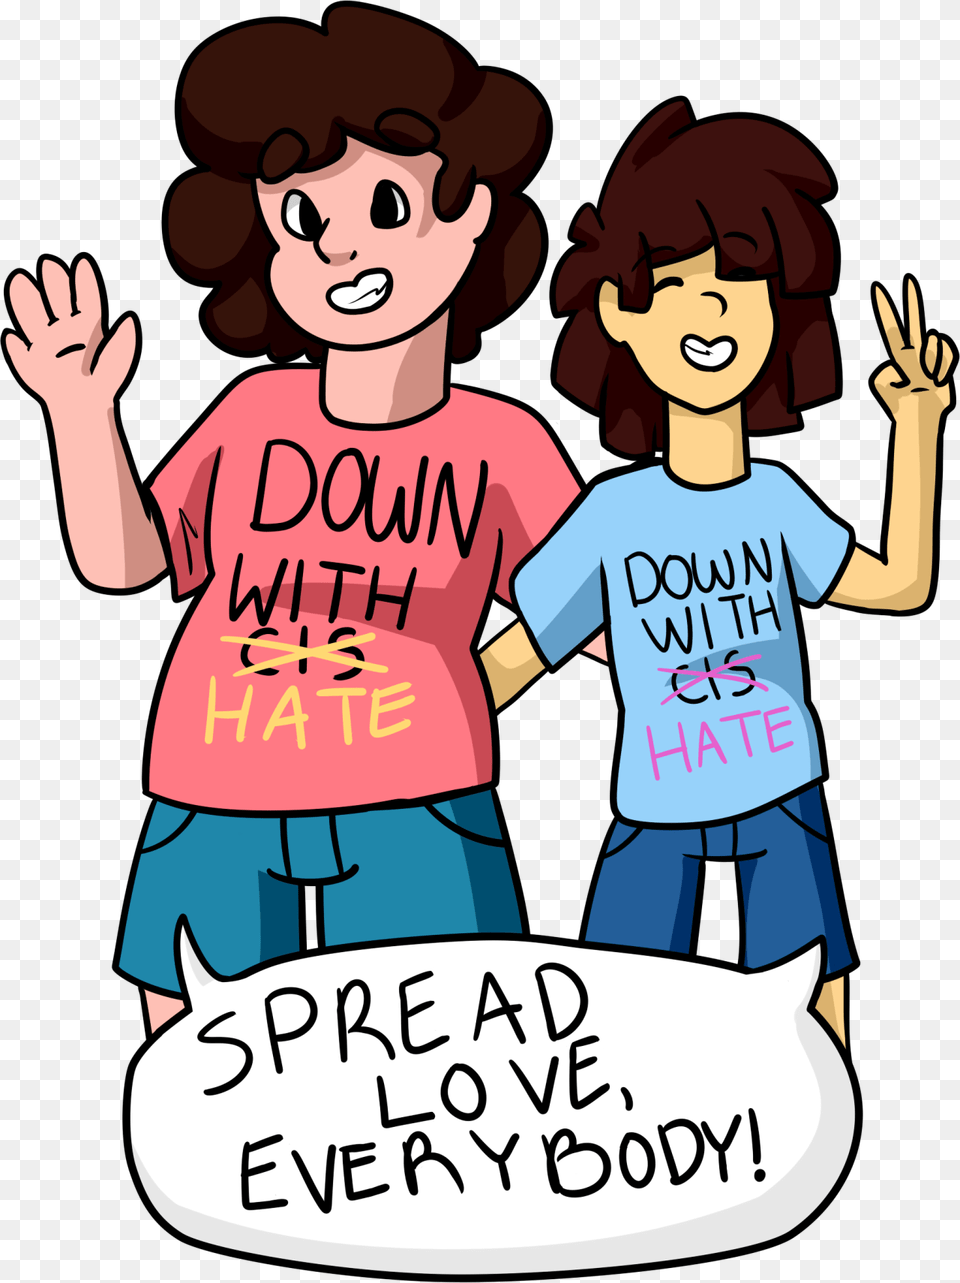 With Hate Down Wi Th Hate 5pread Love Clothing Facial Down With Cis Shirt, Book, Comics, Publication, T-shirt Free Png Download